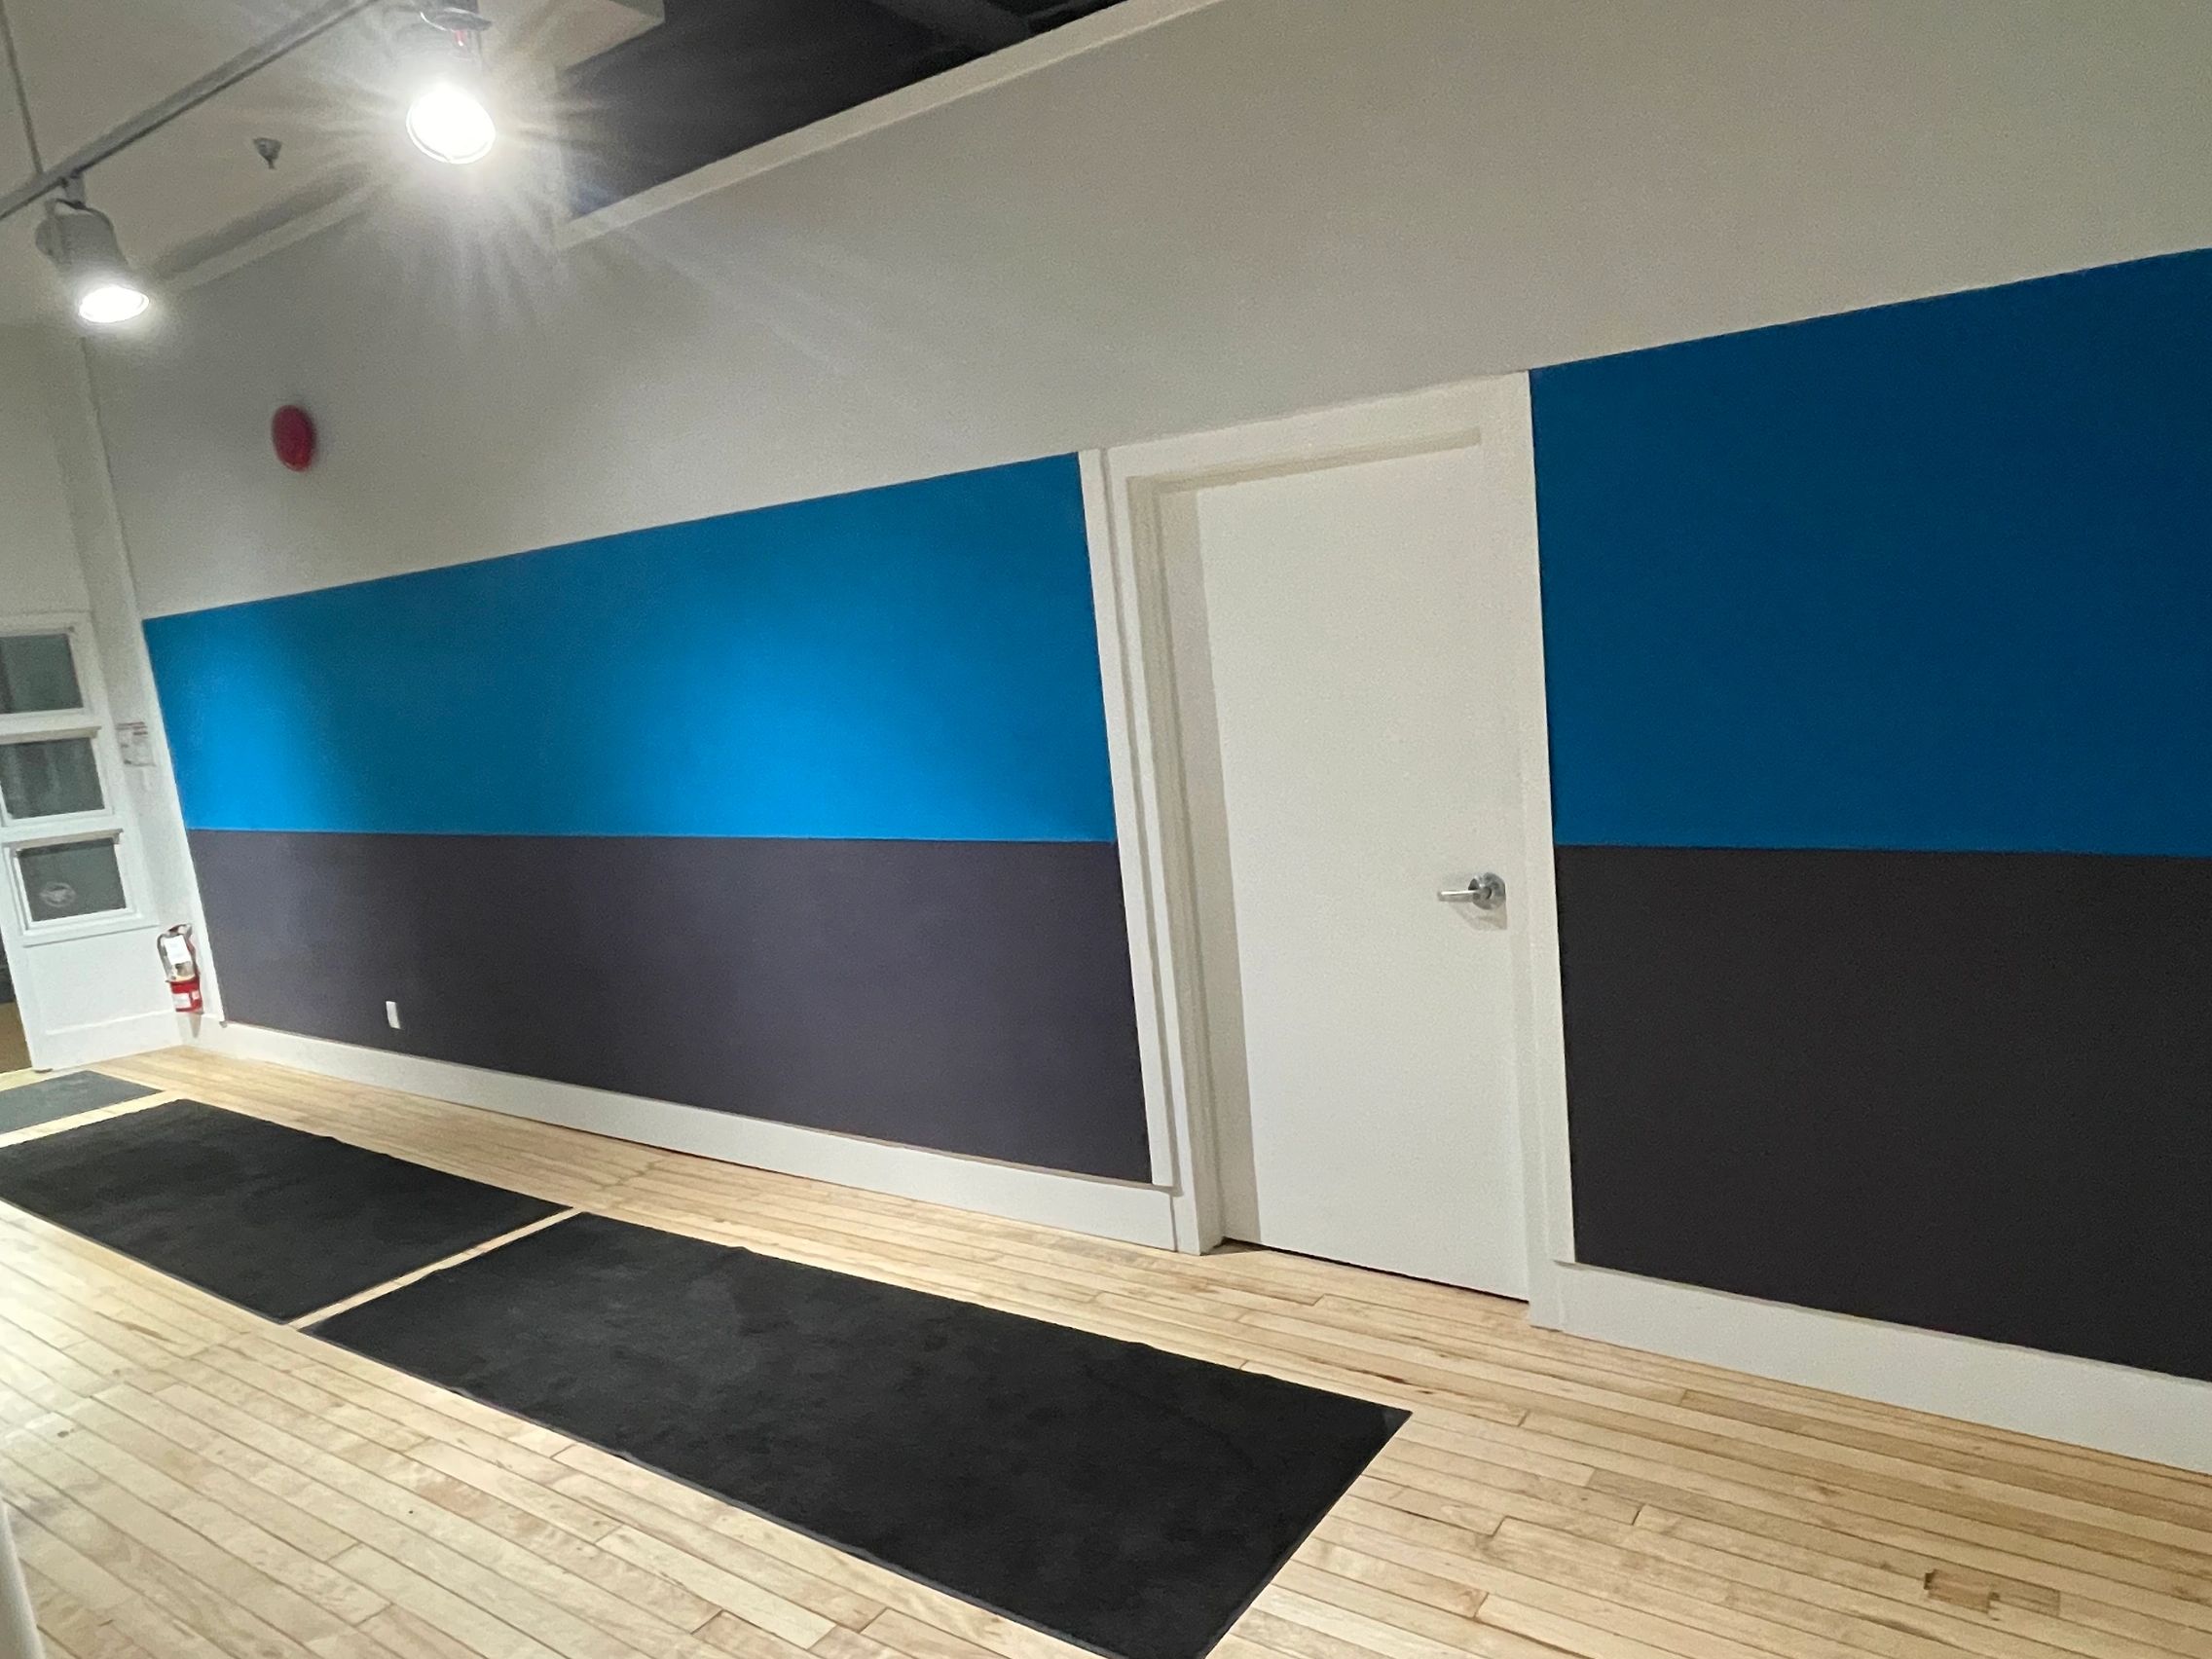 An empty room with blue and black paint job